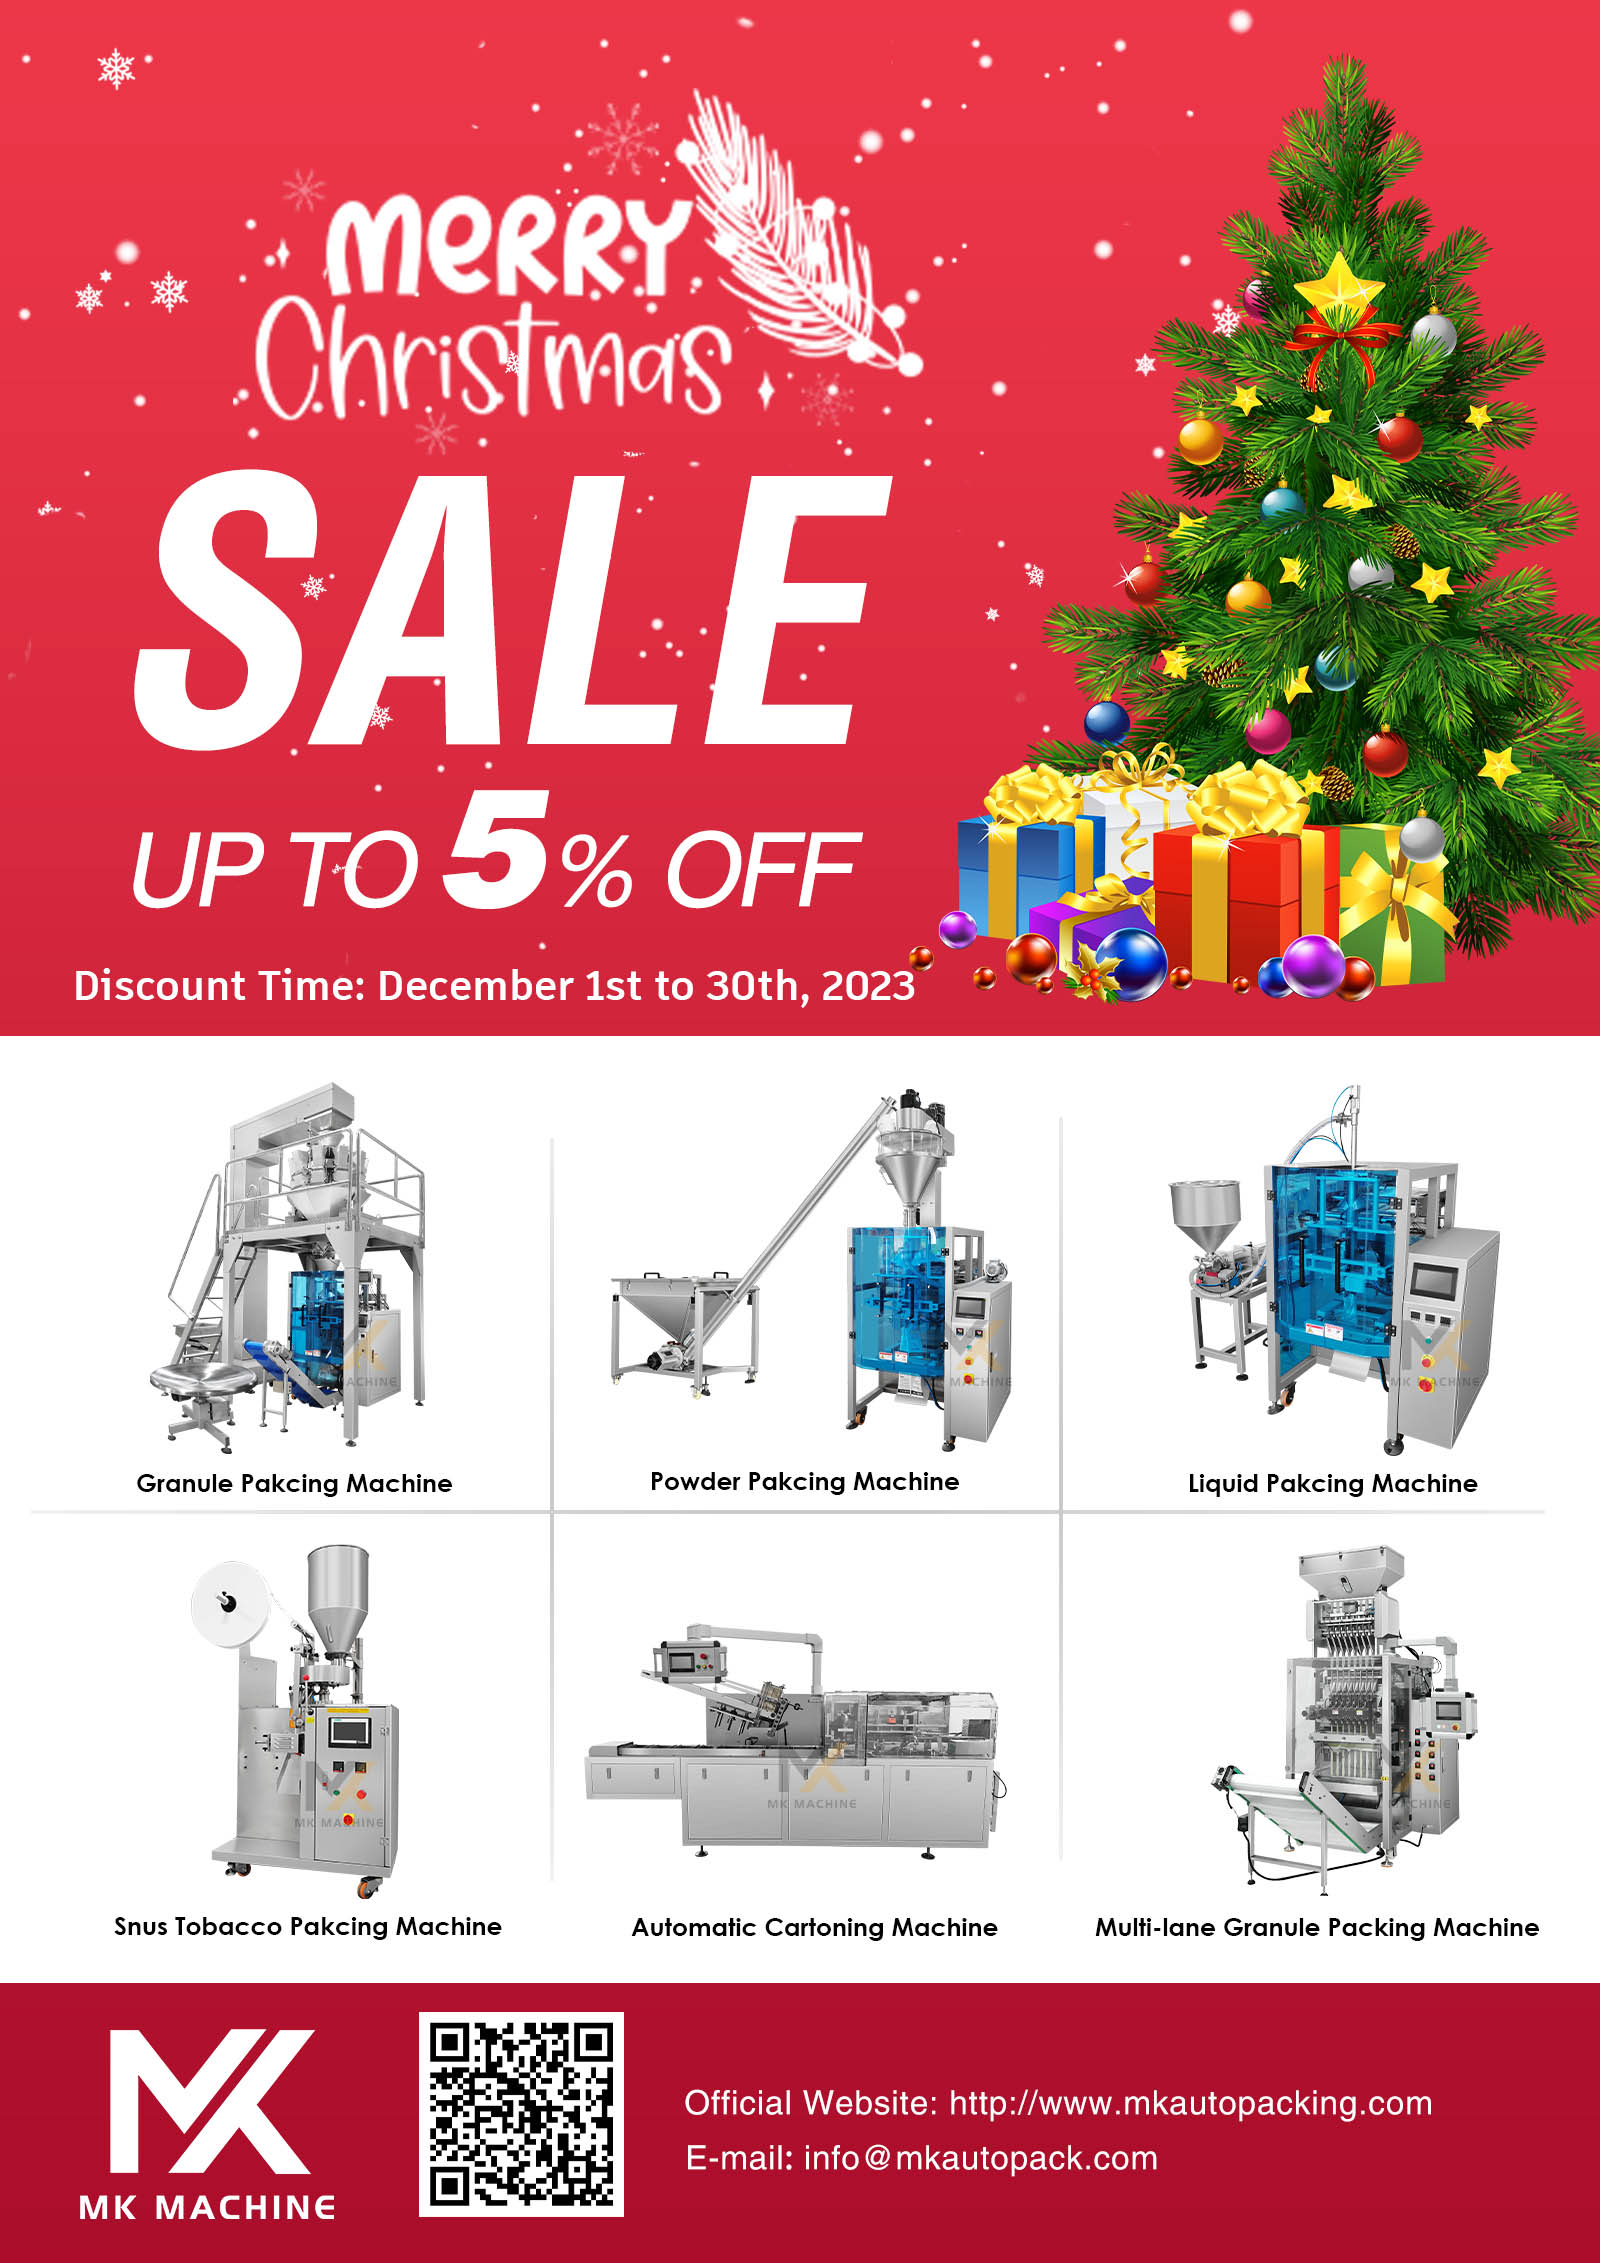 Exciting Christmas Offers on Our Products - Limited Time Only!